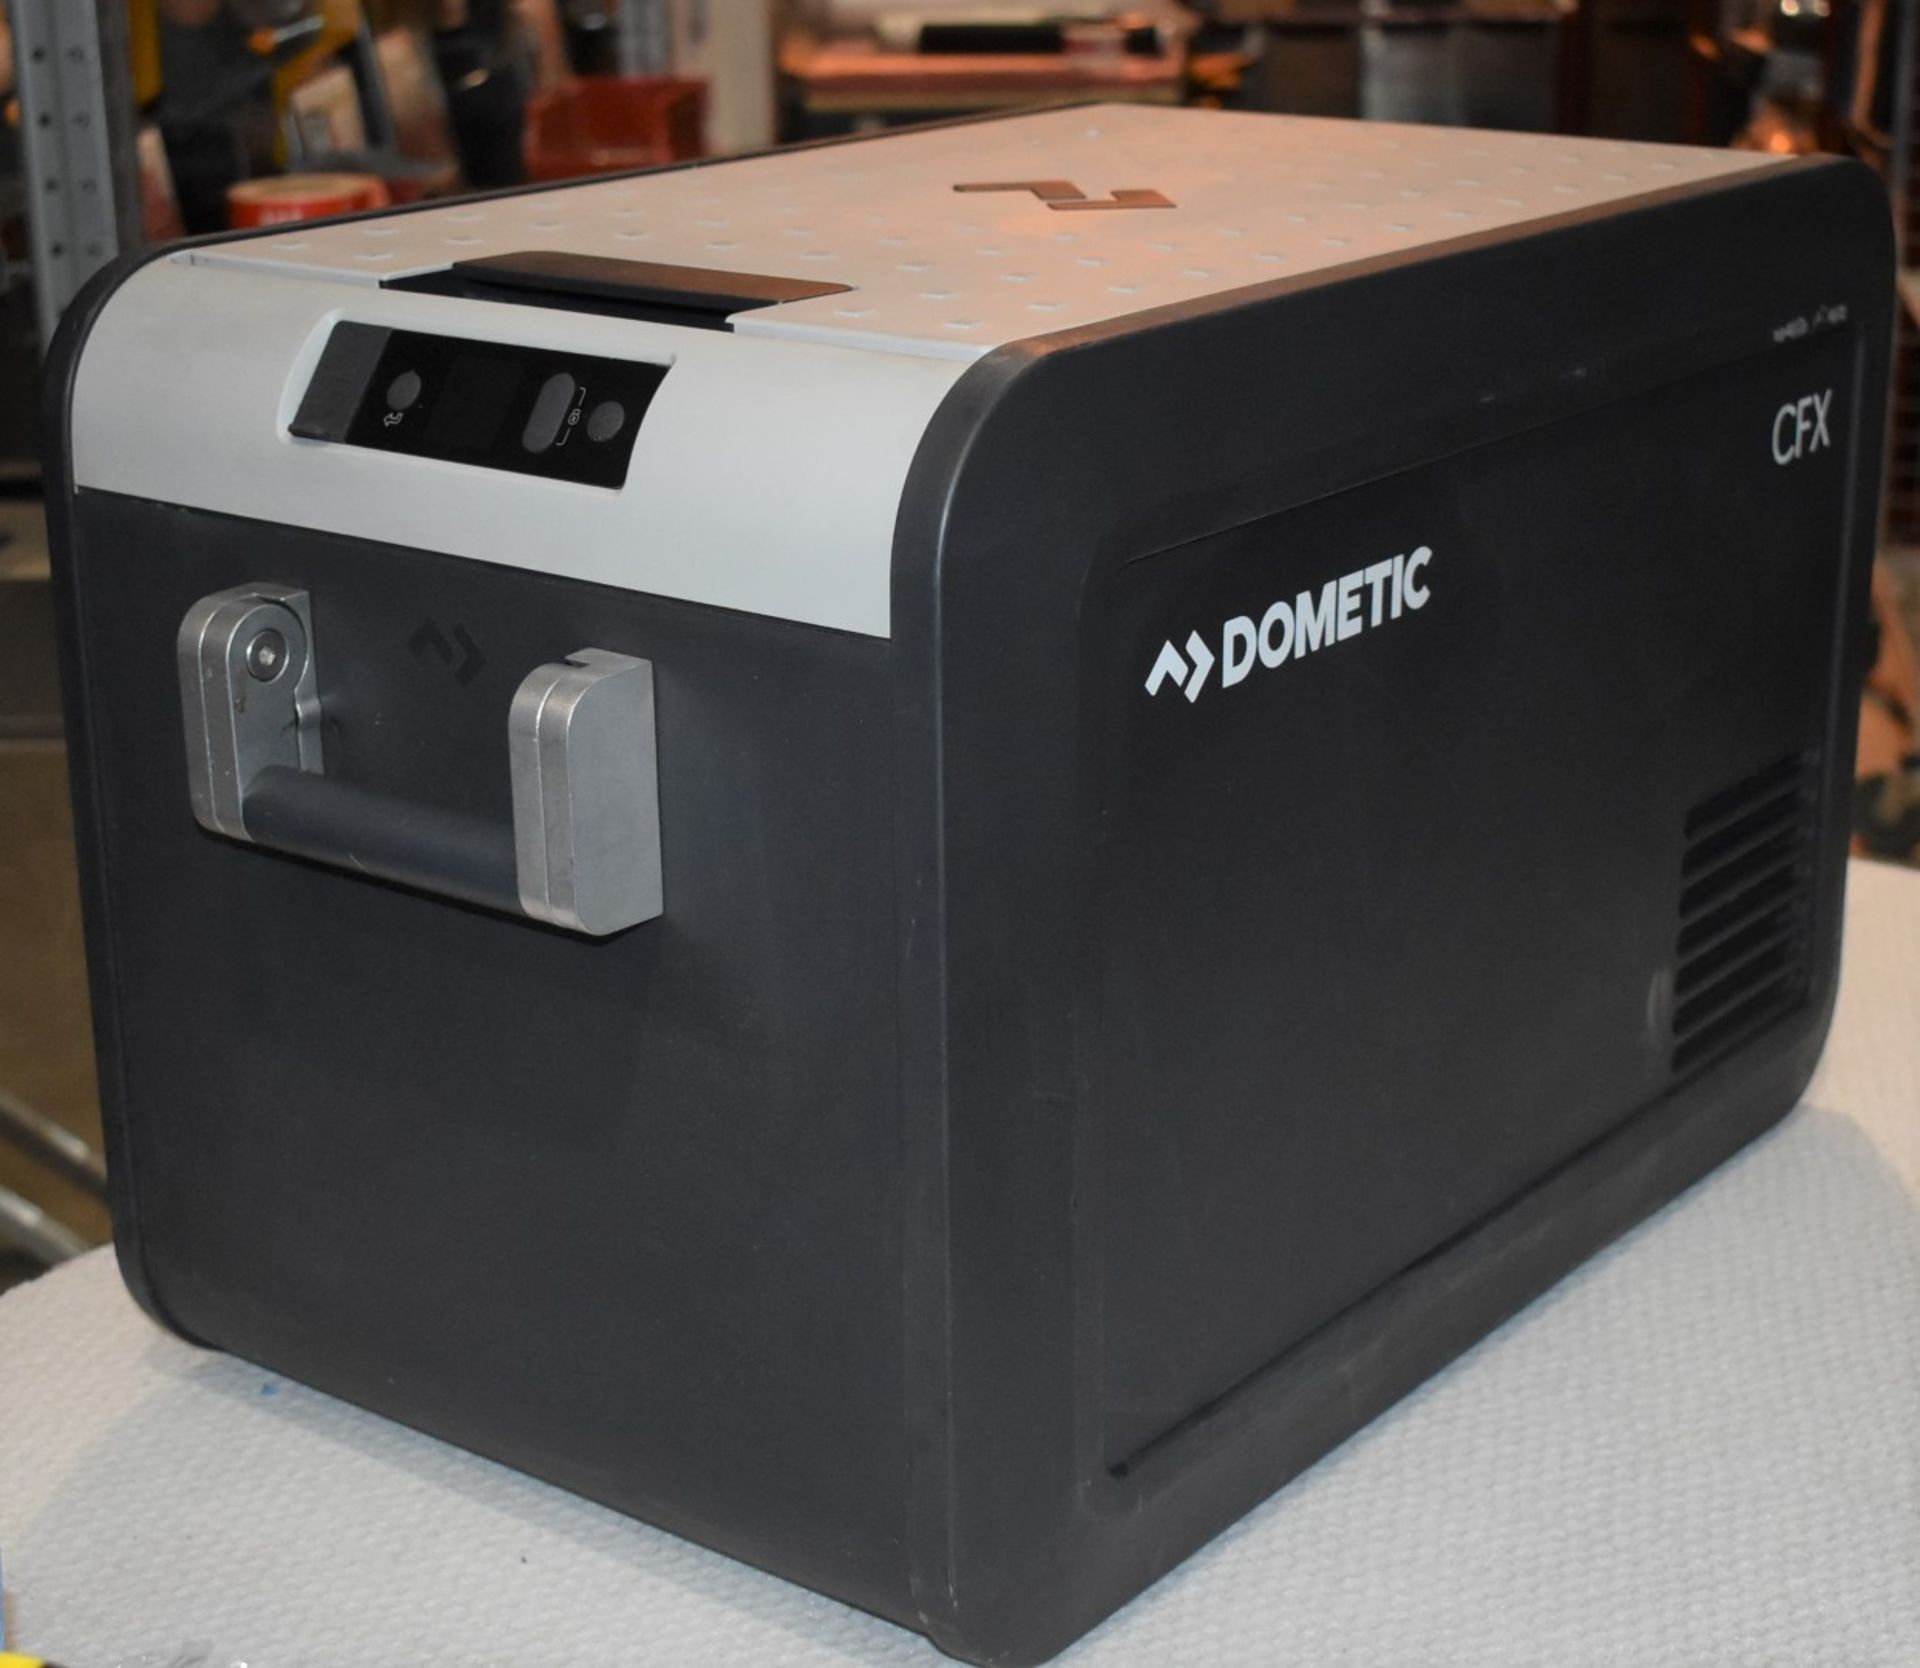 1 x Dometic CFX3 35 Portable 32l Compressor Cooler and Freezer - Perfect For Cooling The BBQ Beers - - Image 6 of 8